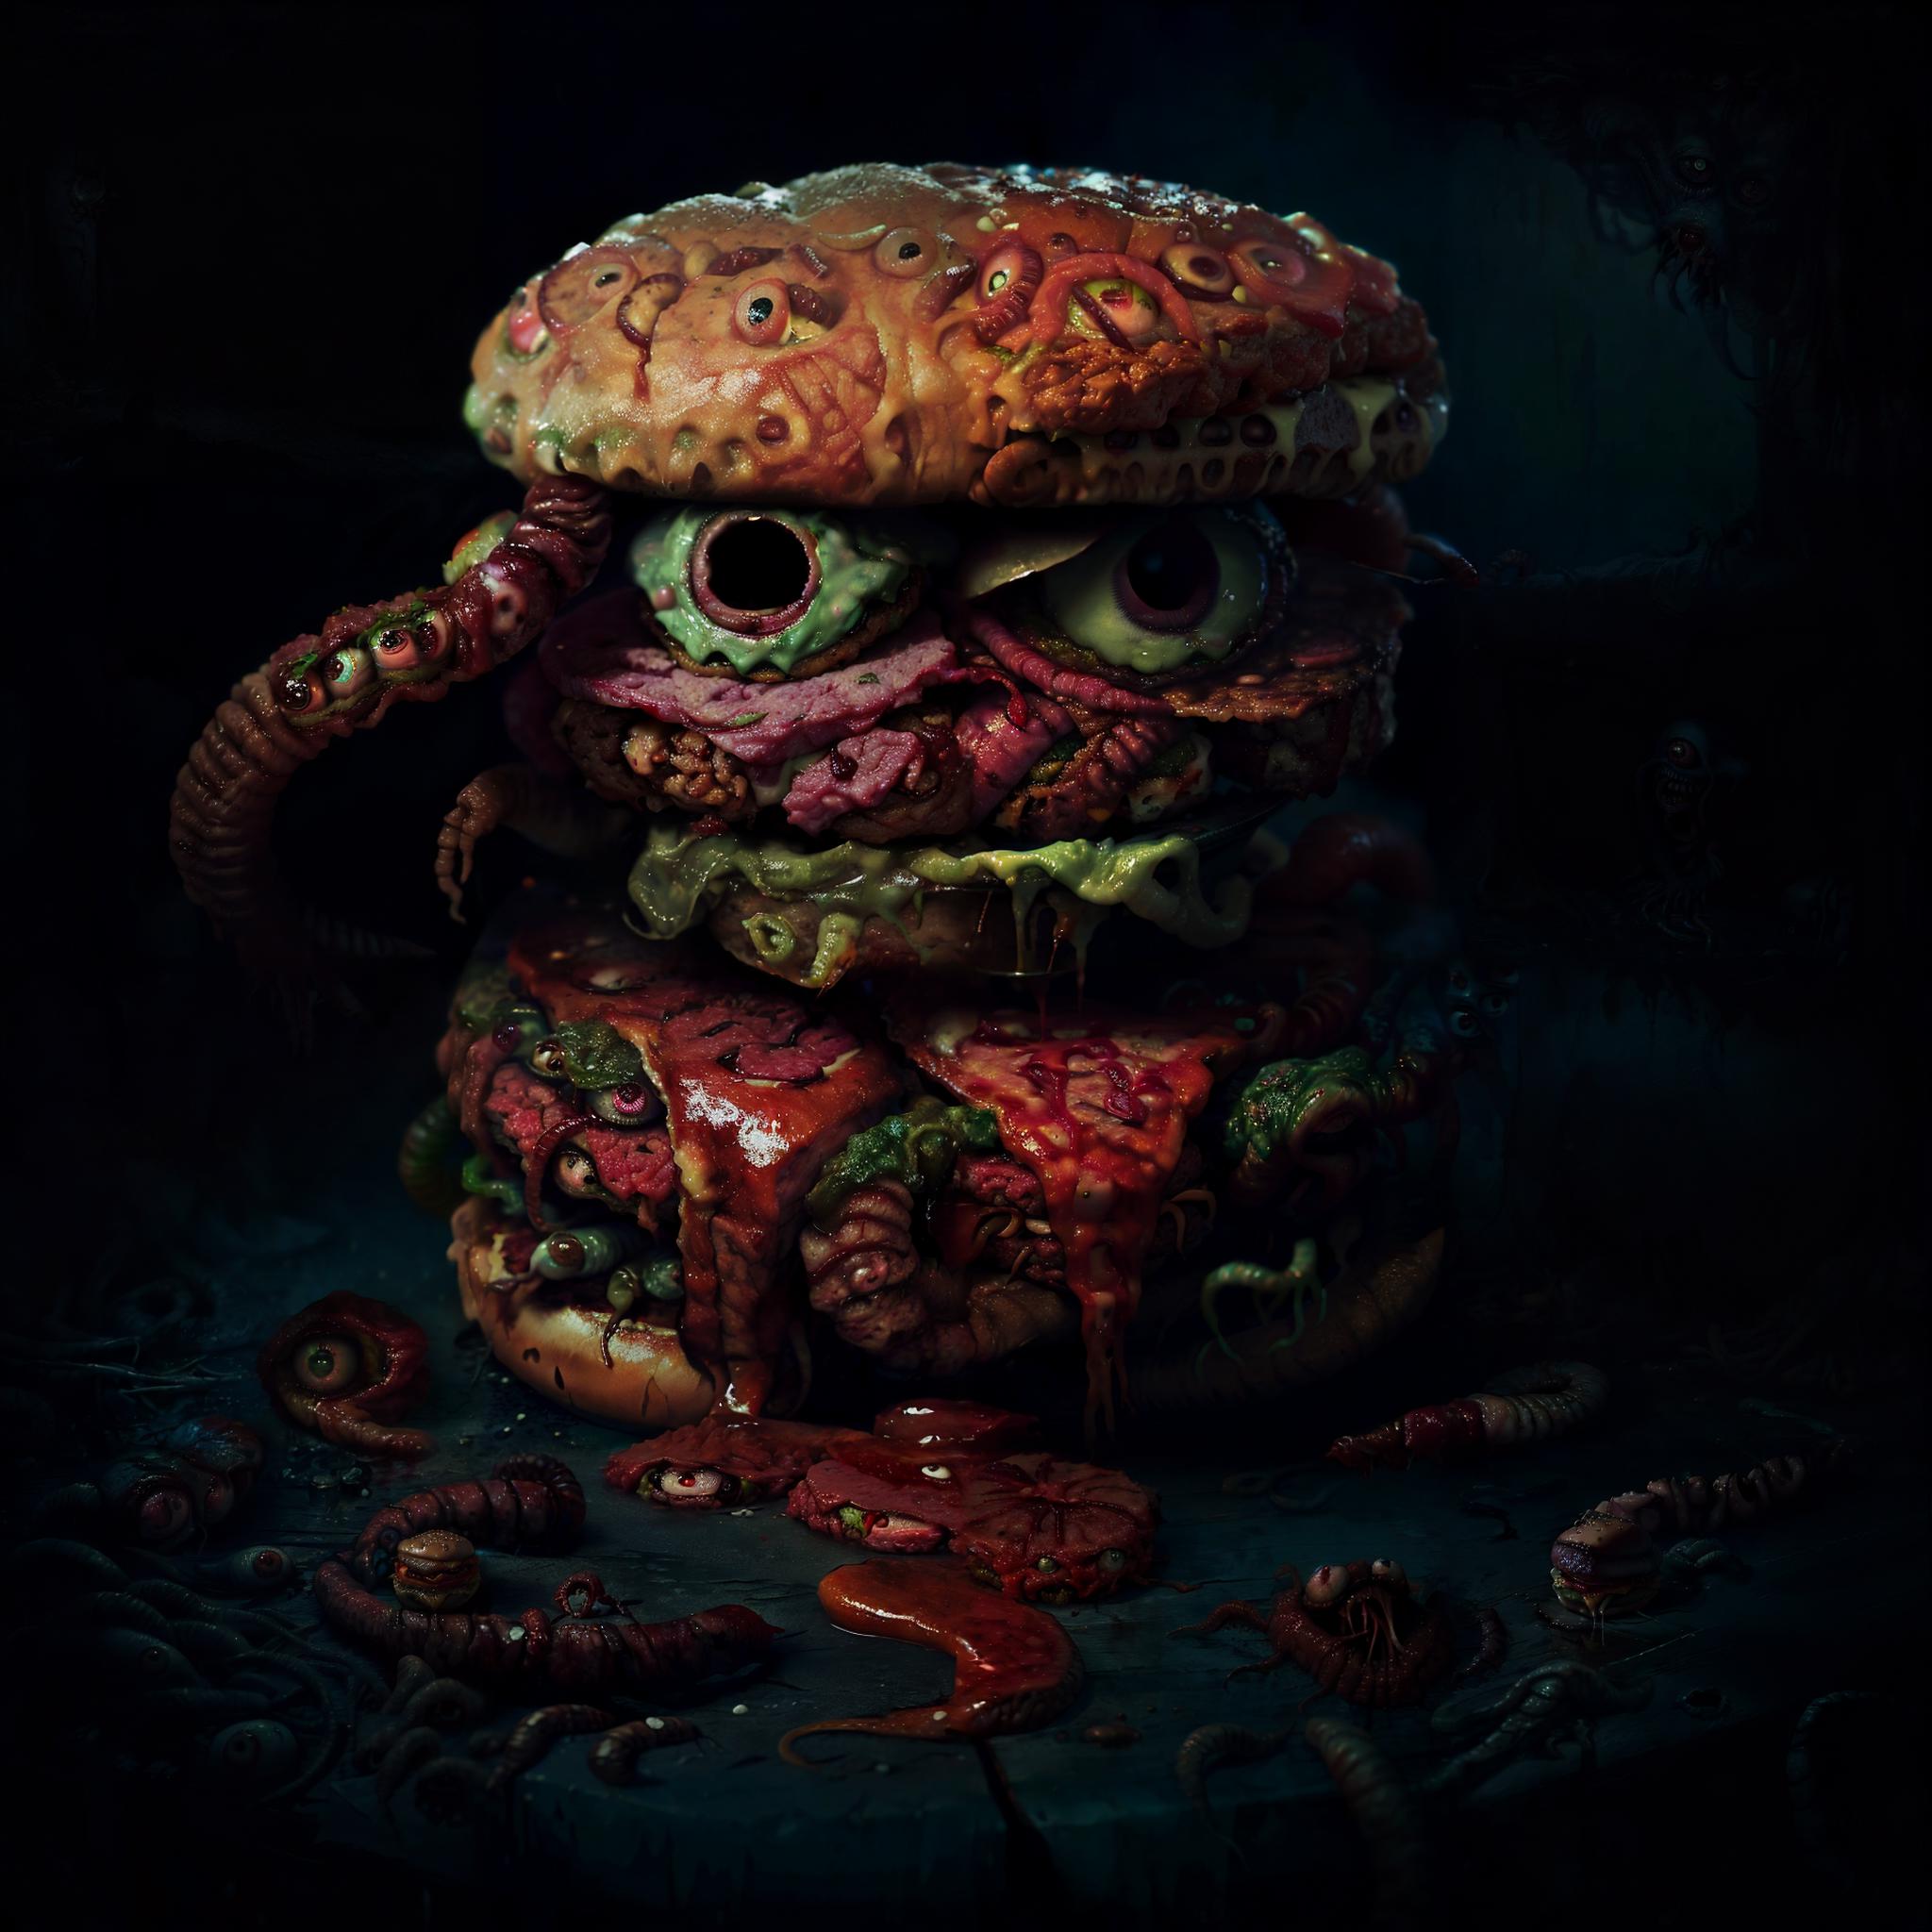 Monstrous Hamburger with Eyes and Tentacles - A Nightmarish Artistic Creation